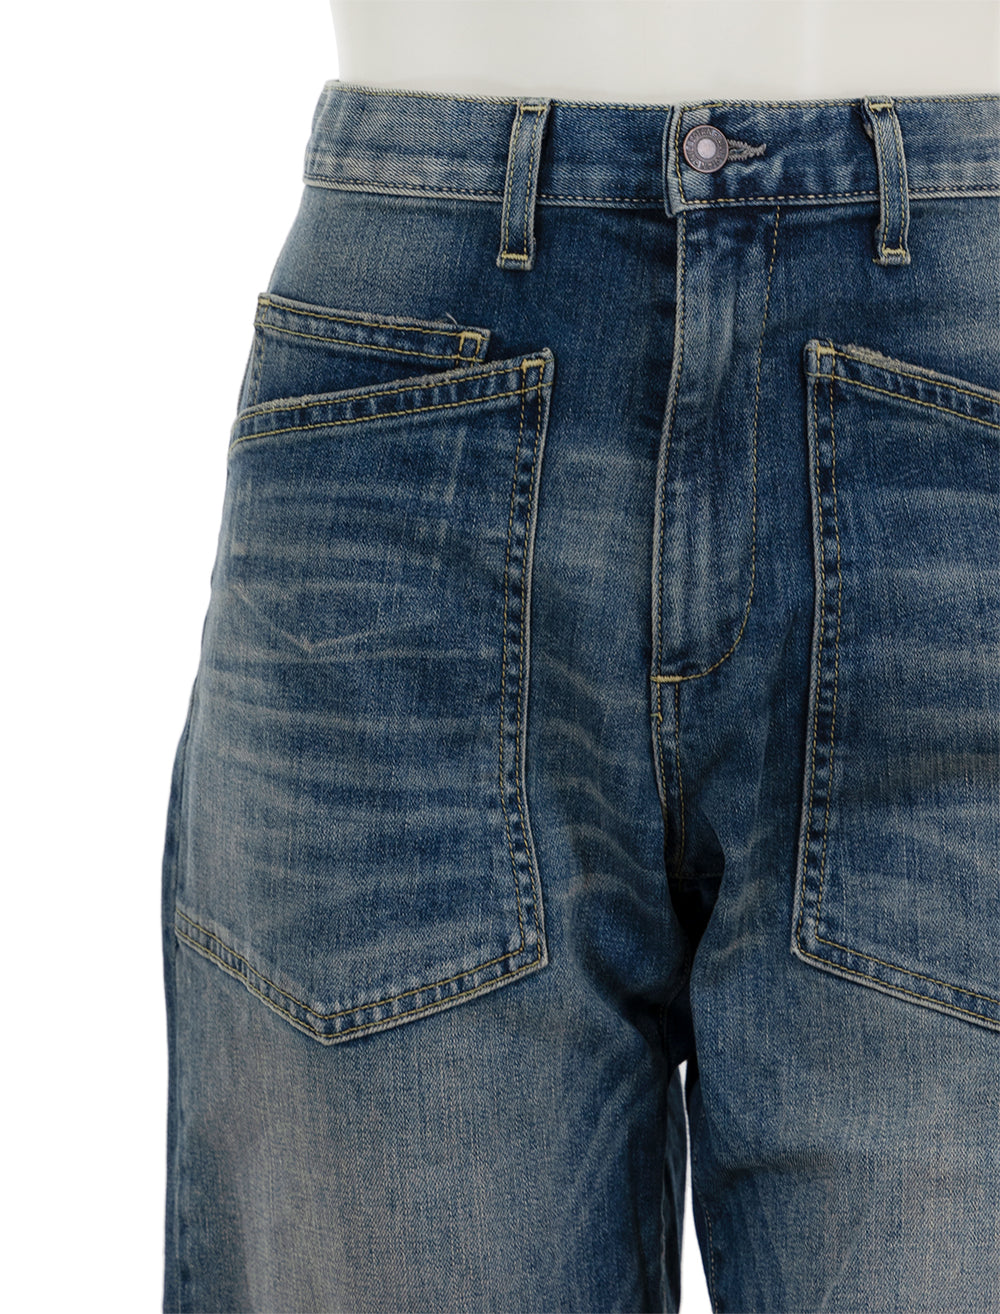 Close-up view of Nili Lotan's shon jean in classic wash.